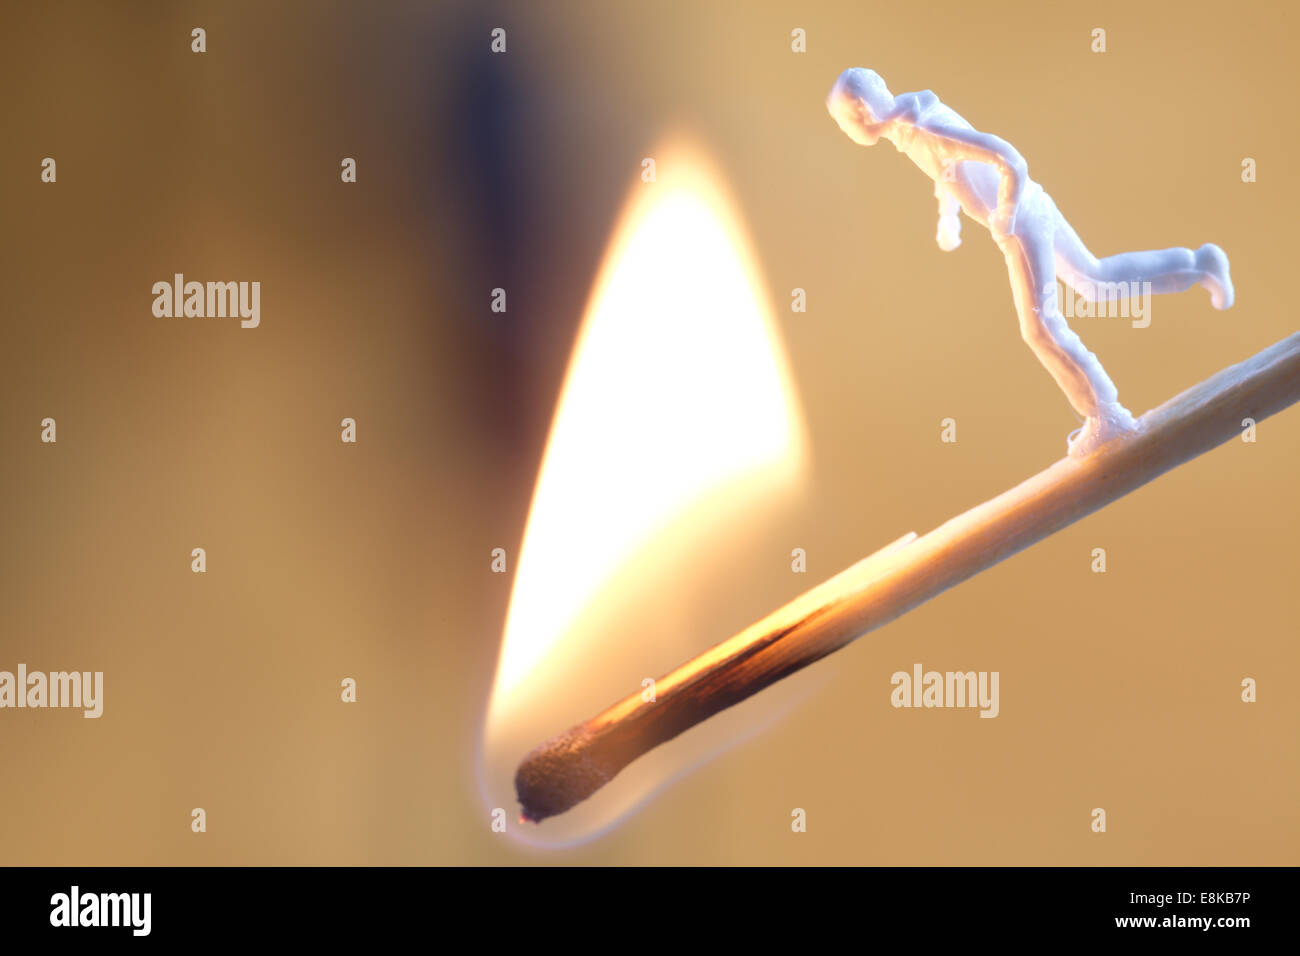 A small figure is running on a burning match towards the flame. Stock Photo